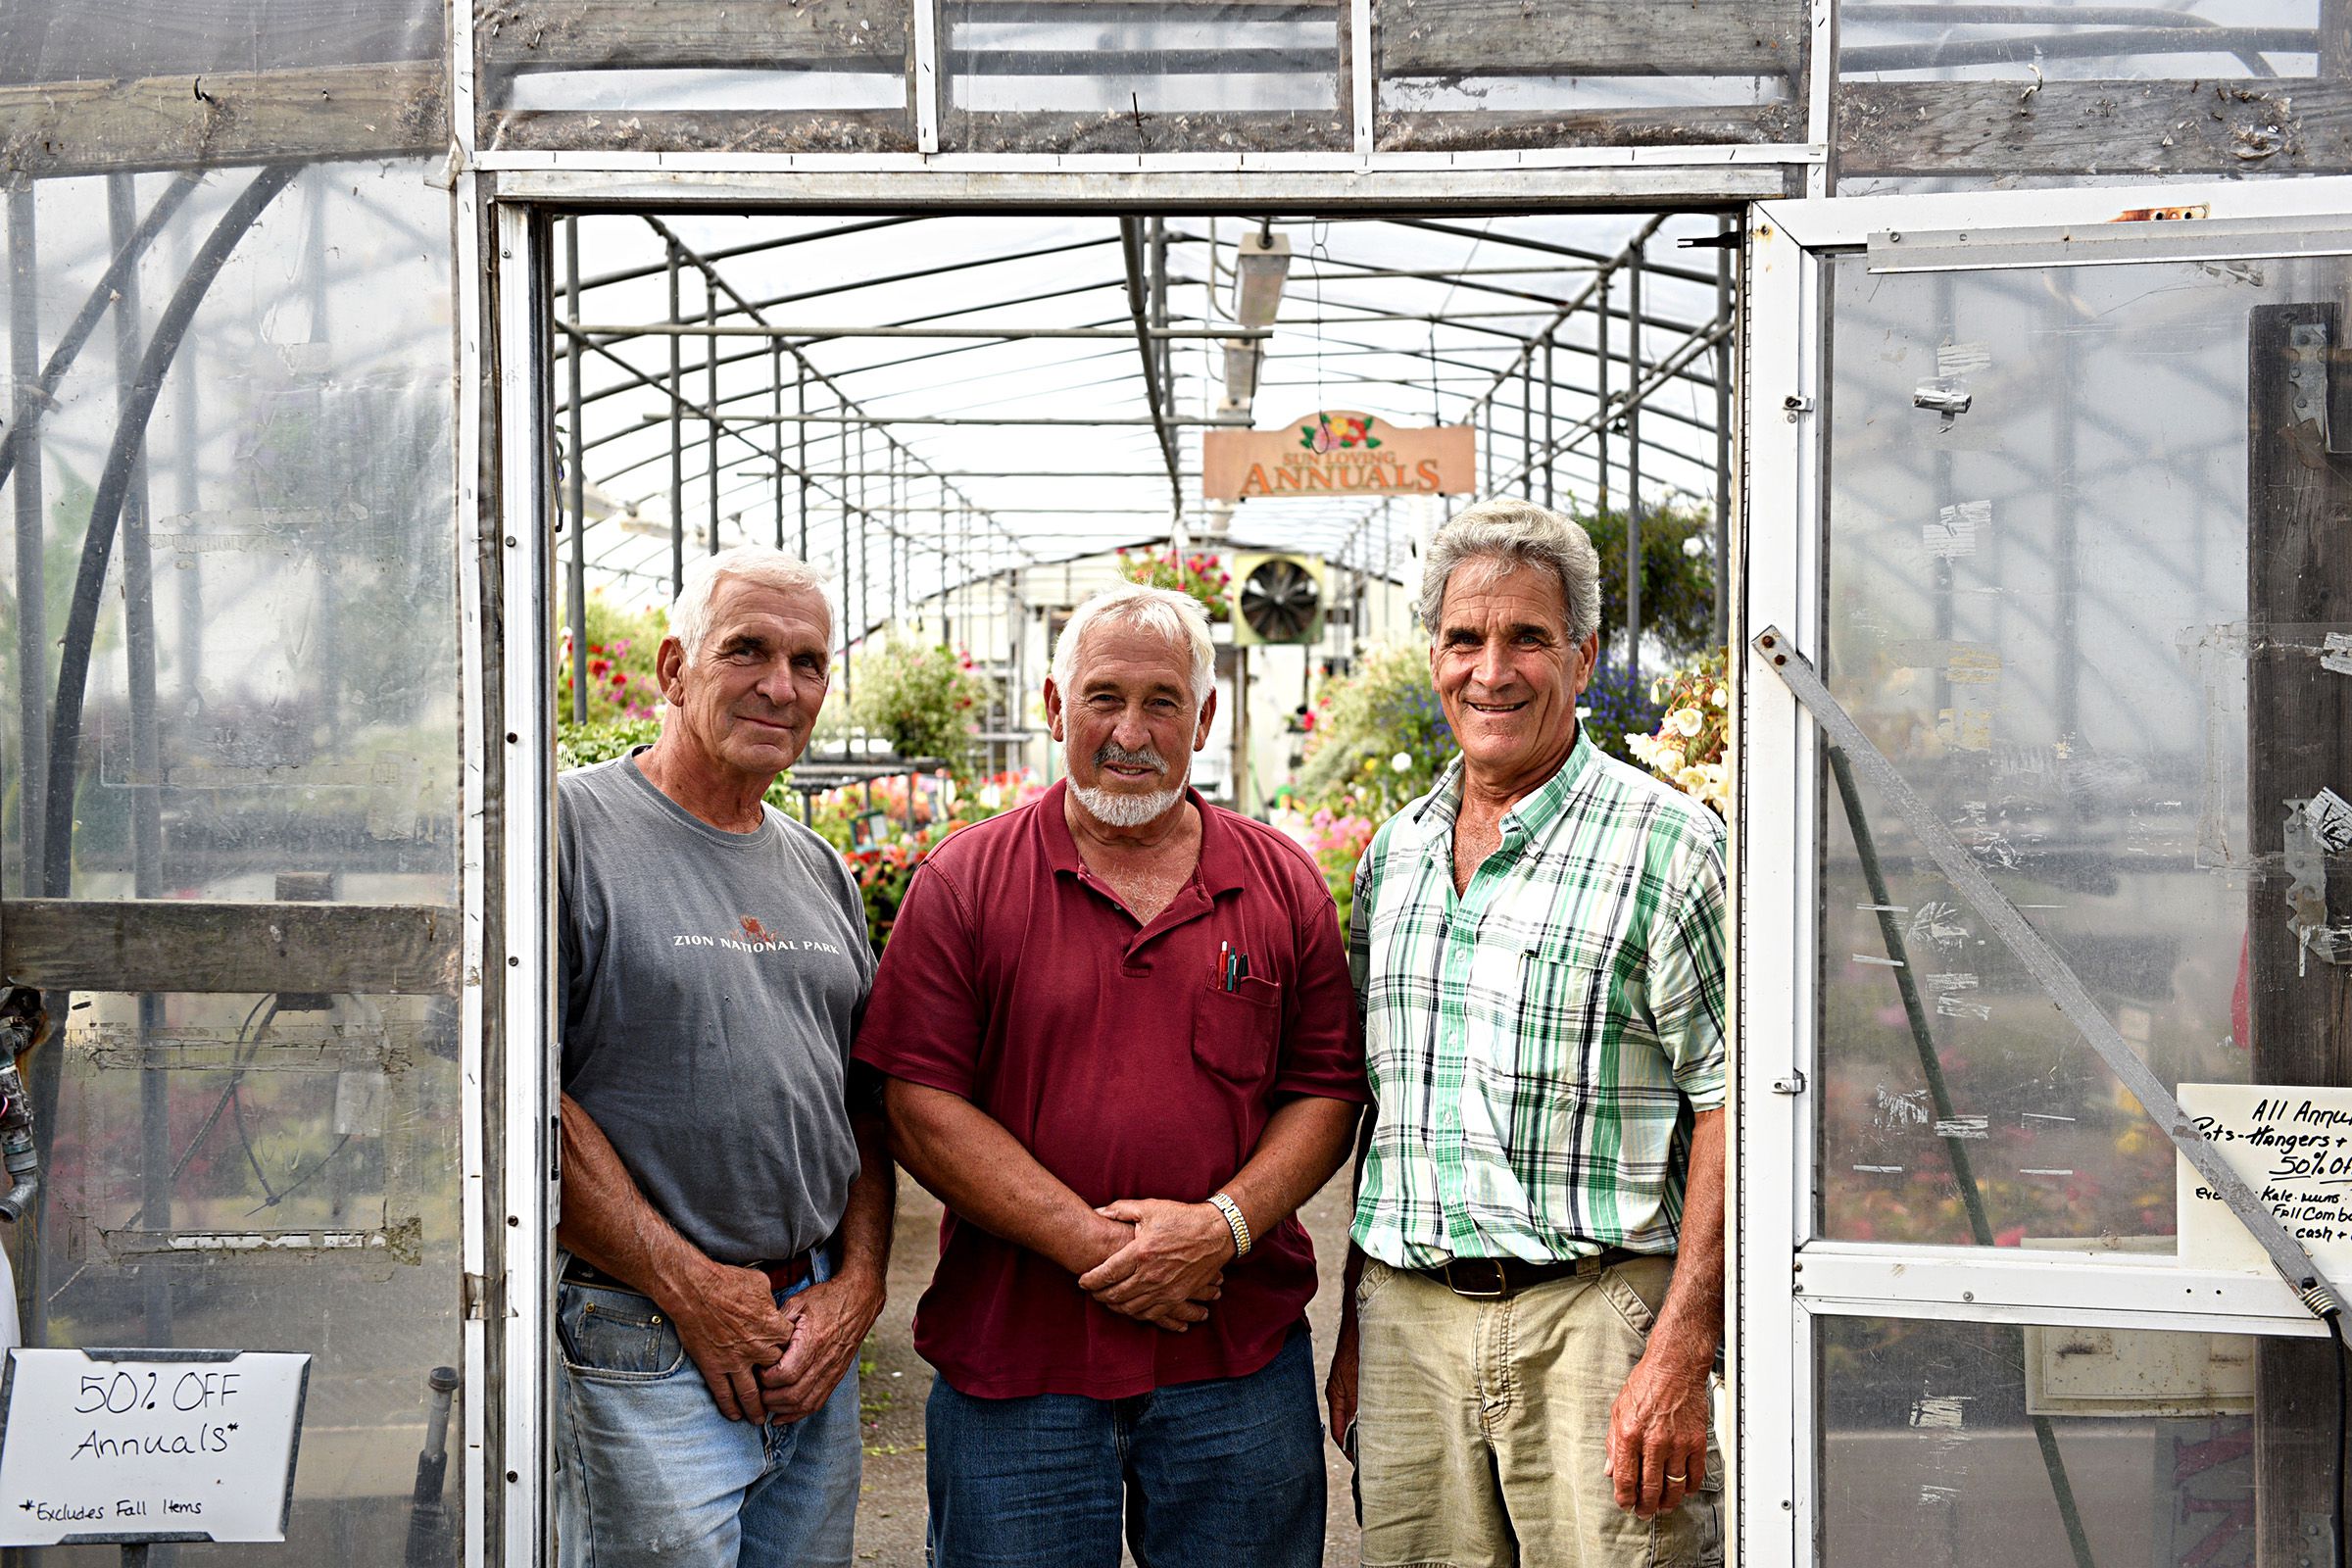 Jim, left, Norm, and Joe Longacre at Longacres' Nursery Center in Lebanon, N.H., on Sept. 7, 2017.(Valley News - Jennifer Hauck) Copyright Valley News. May not be reprinted or used online without permission. Send requests to permission@vnews.com.